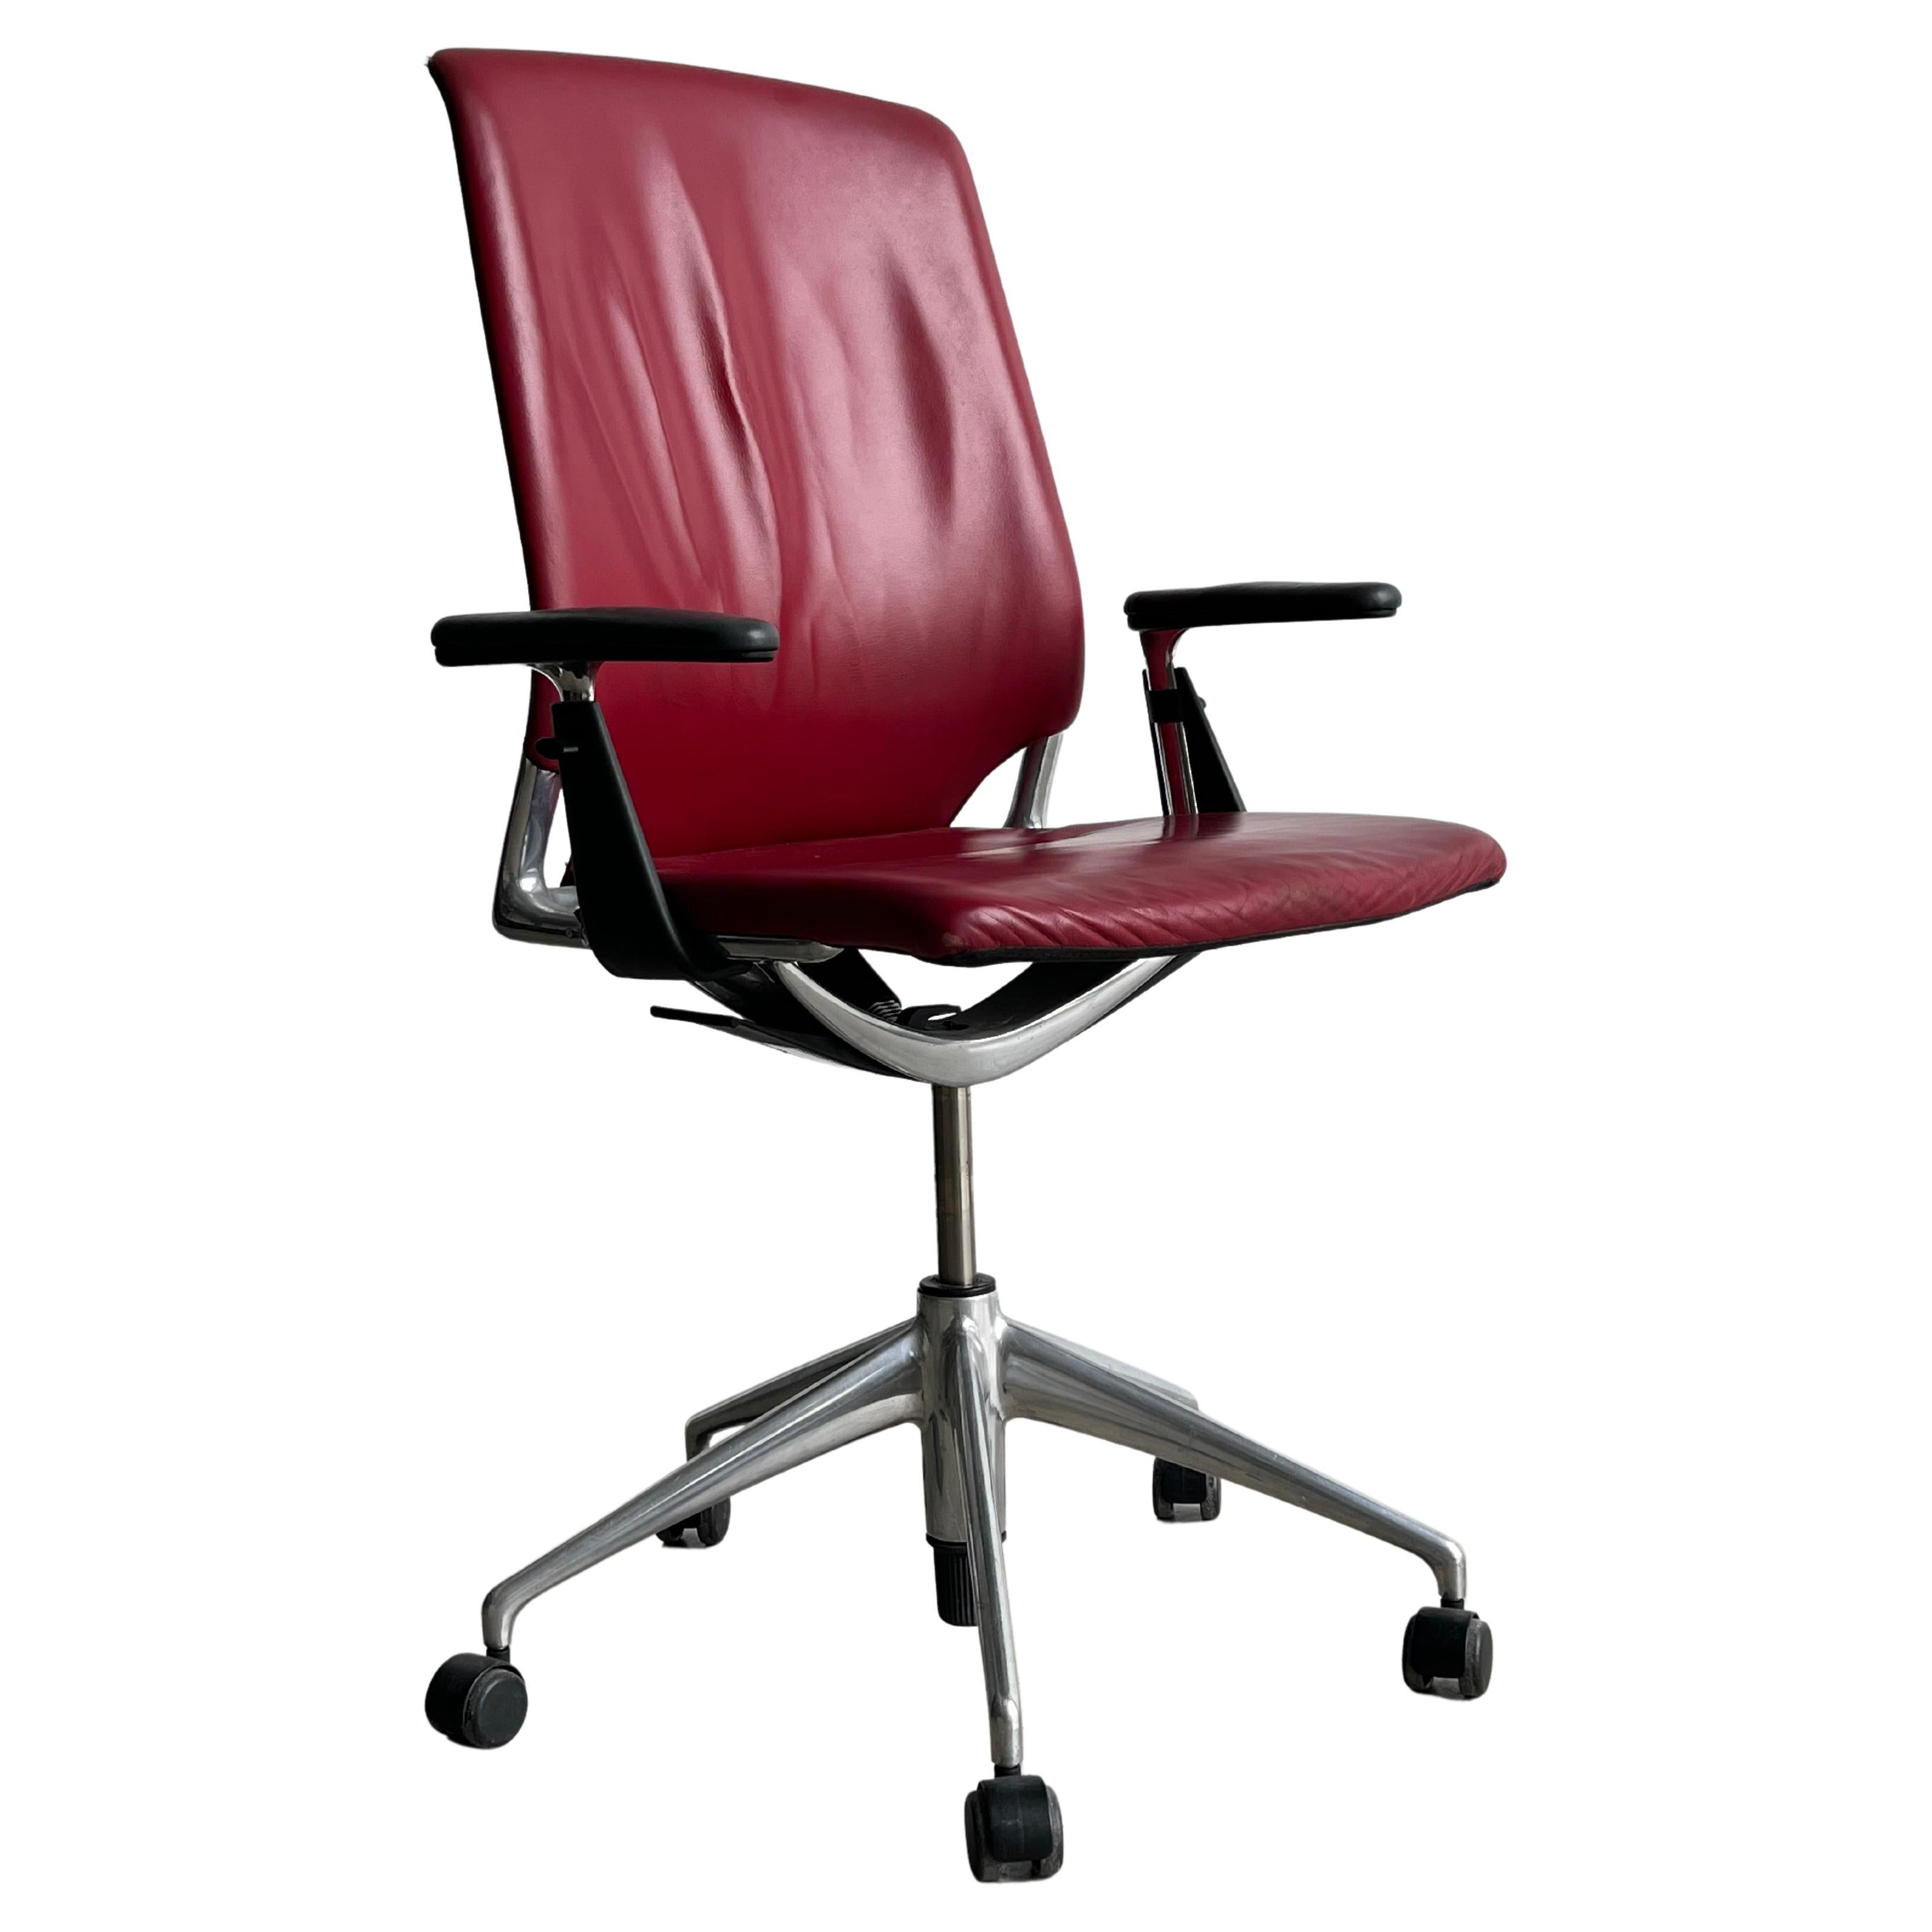 Italian Alberto Meda Office Chair for Vitra in Red Leather 1990 For Sale